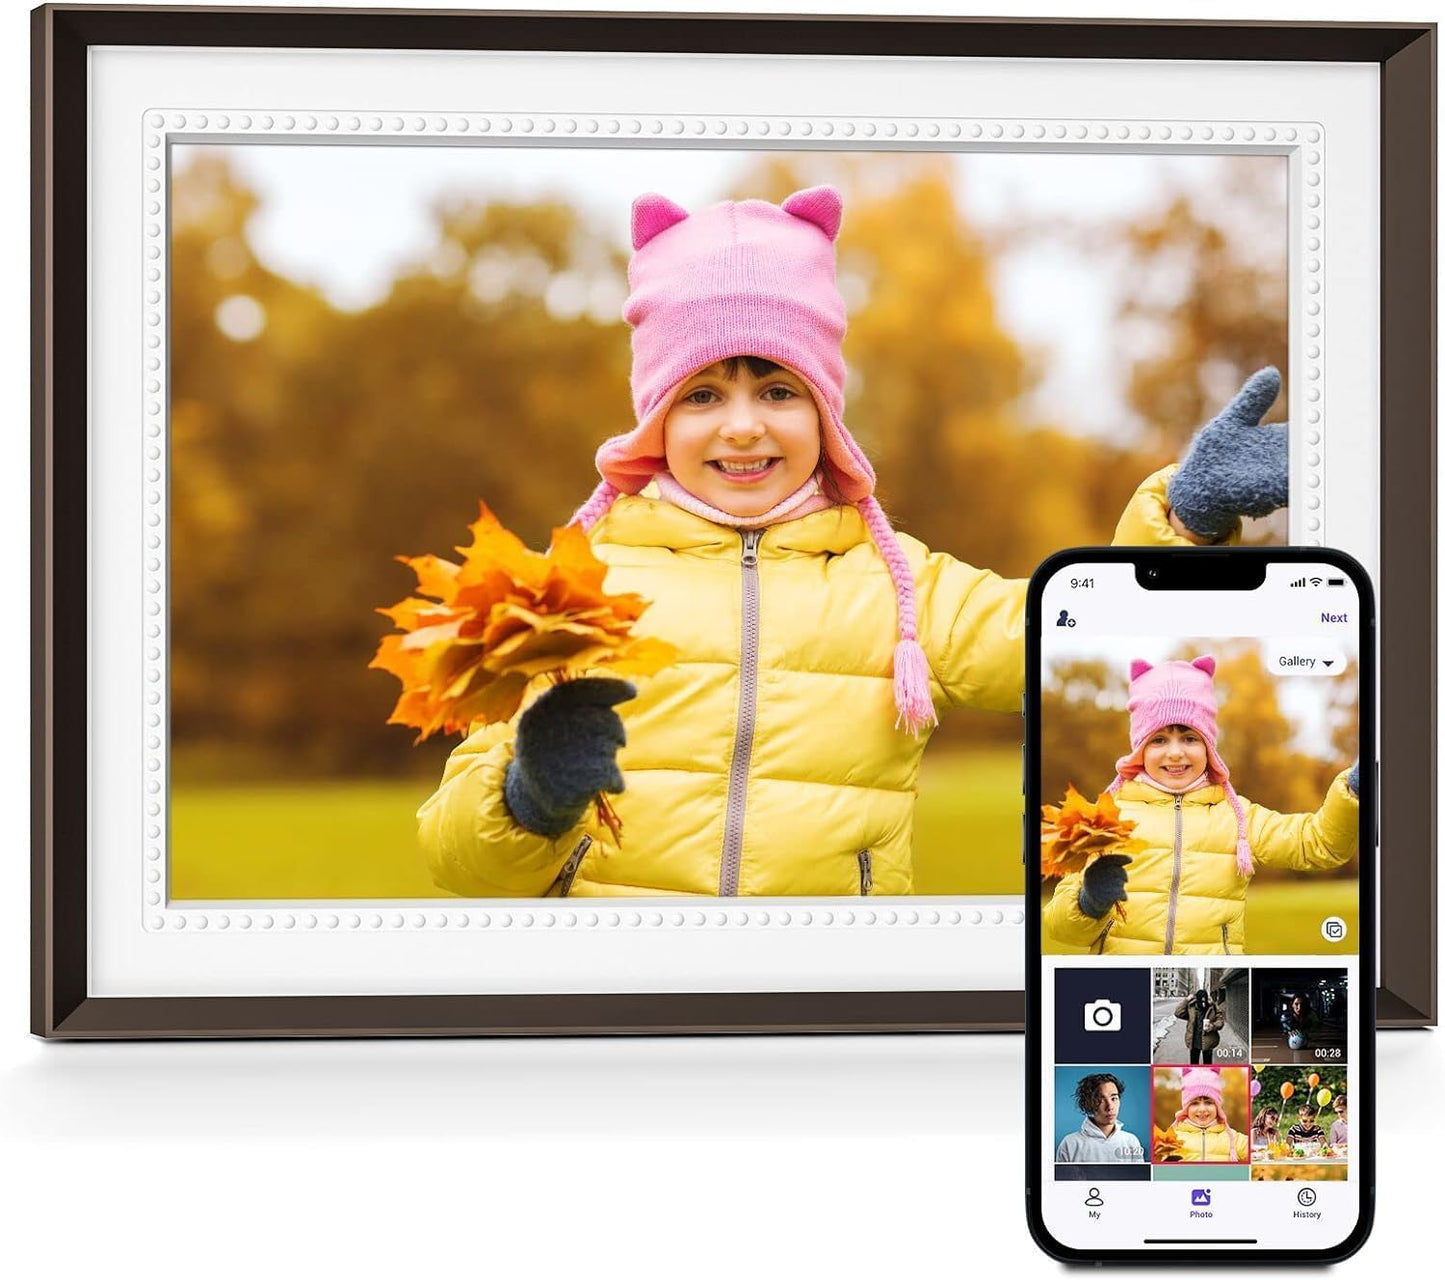 Jazeyeah 10.1 Digital Picture Frame 1280 * 800 HD Touch Screen, 16GB Storage Capacity, Easy to Record Life's Little by Little, is a Precious Gift for Friends and Family